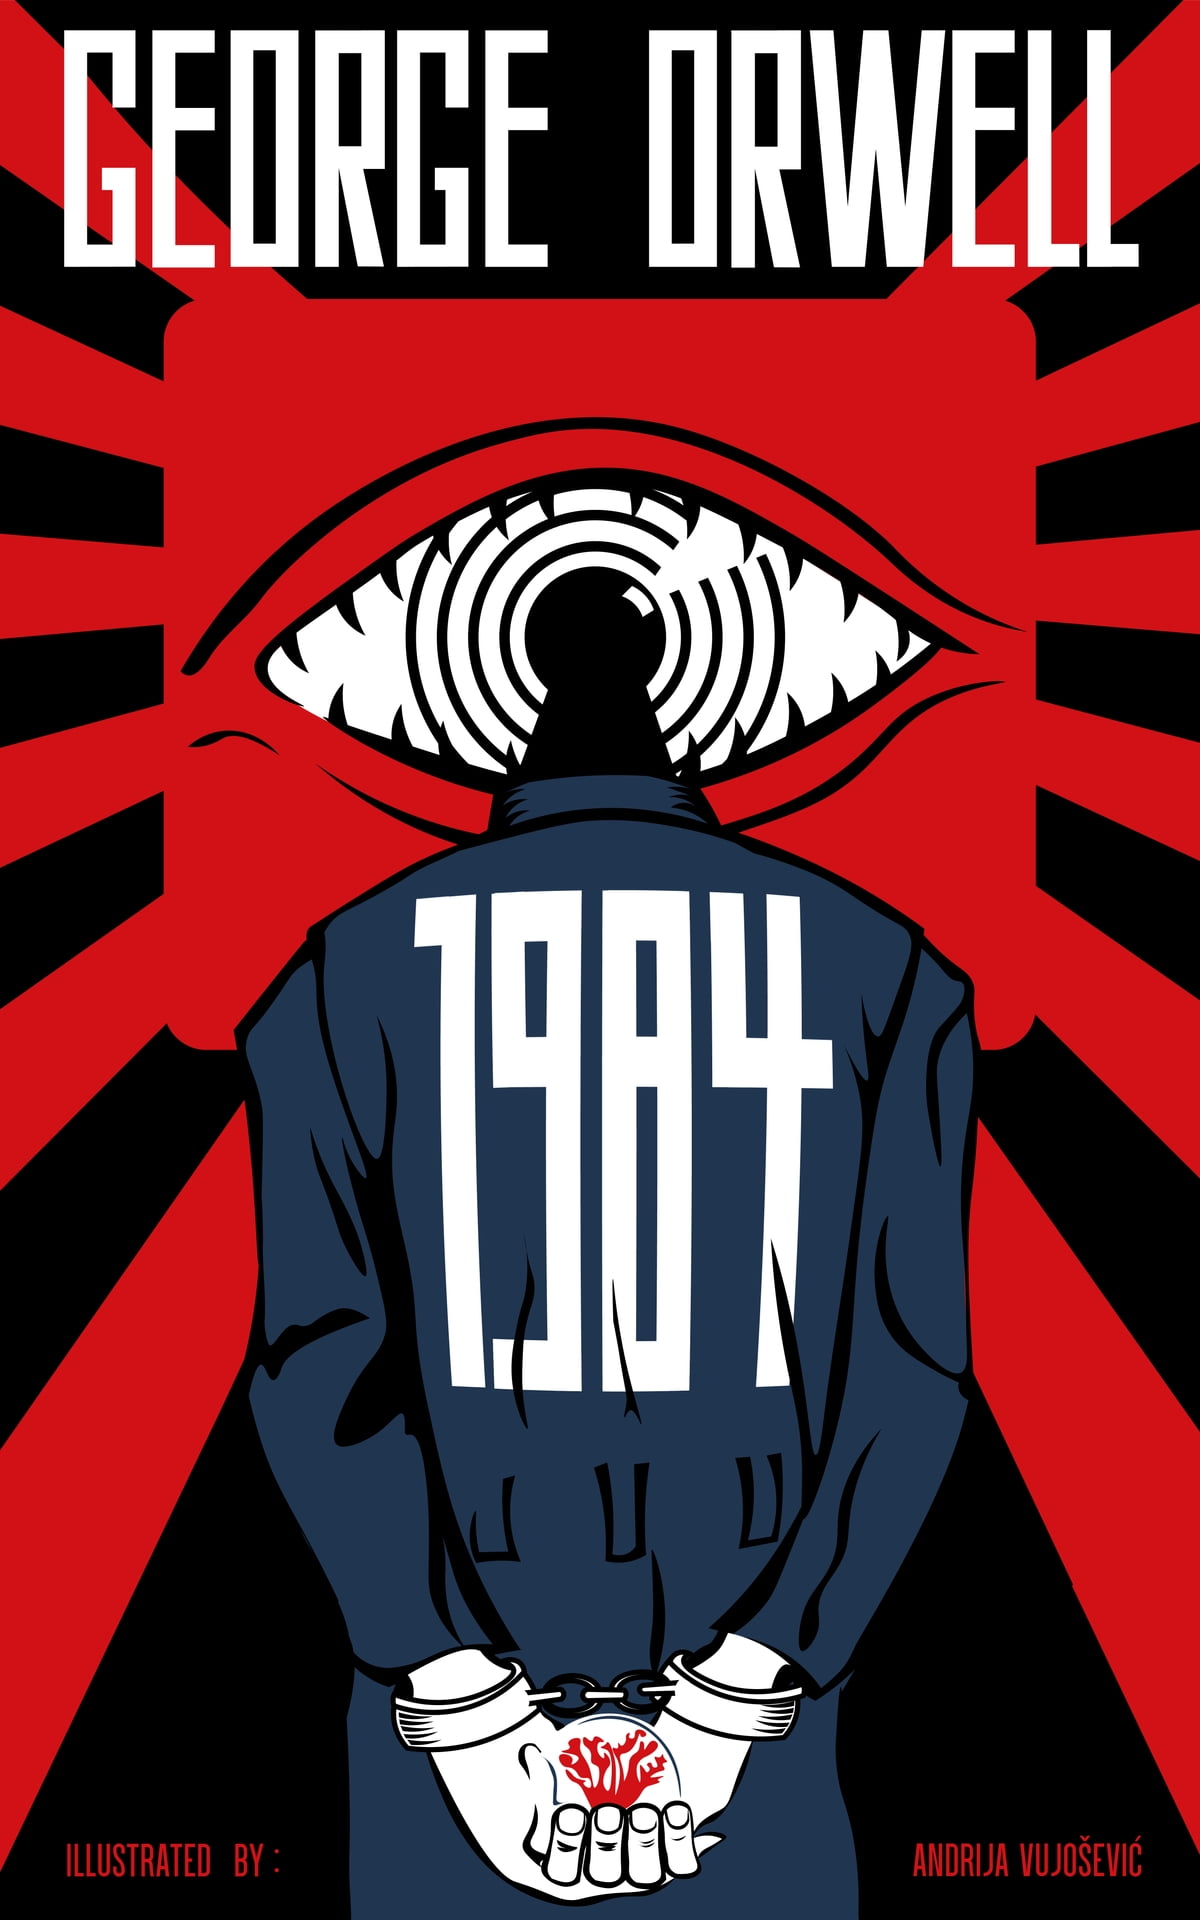 1984 by George Orwell: A Timeless Cautionary Tale